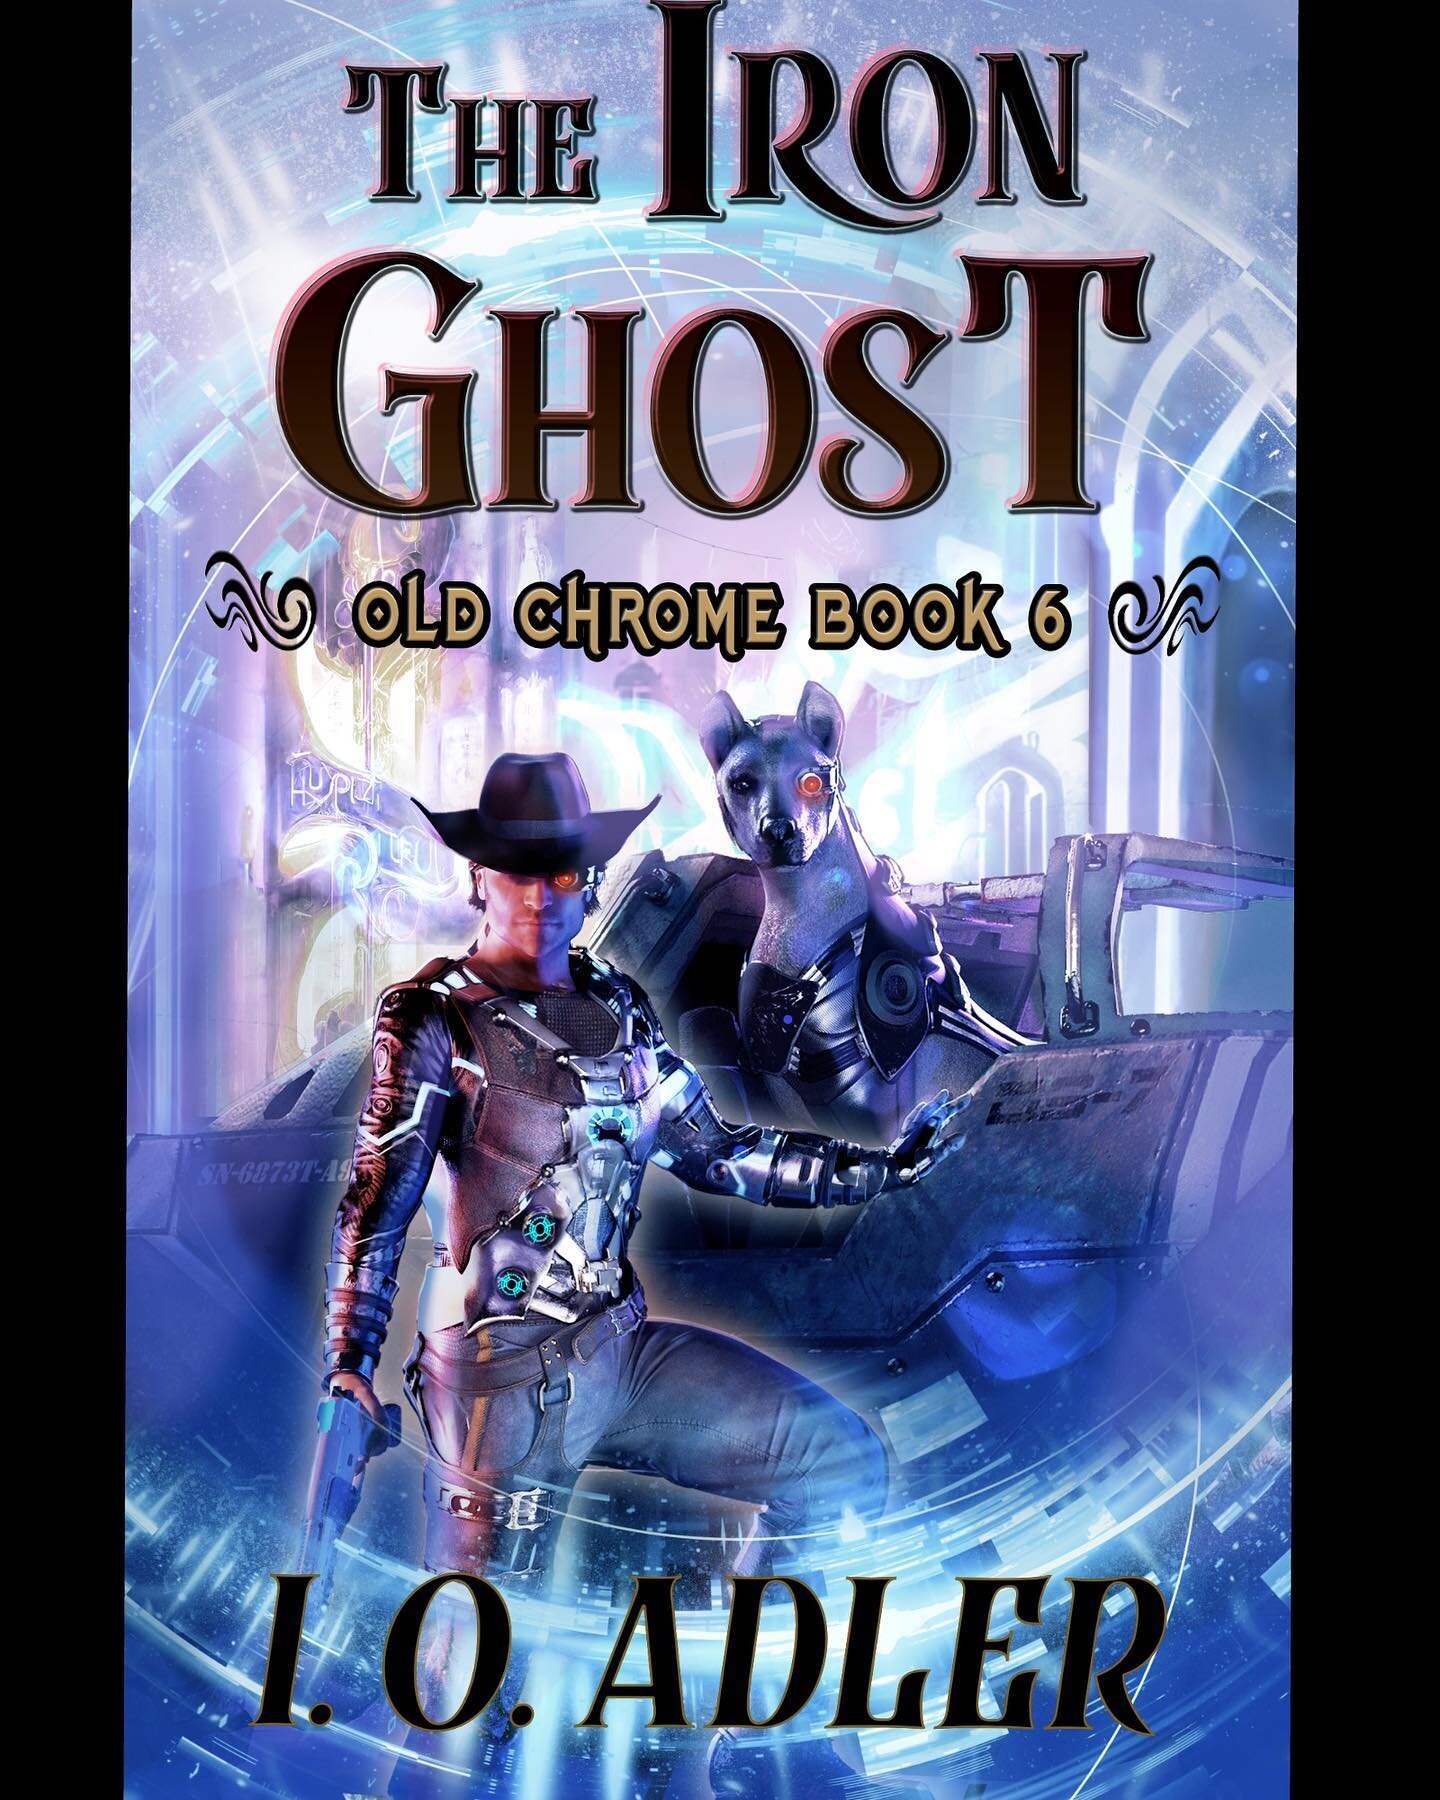 I had fun with this one. Cover for book 6 in the Old Chrome series by @i.o.adler
I waited to post this until the author put up the preorder on Amazon. The book release date is June 1st. 

#westernscifi #westernsciencefiction #commissionedbookcover #c